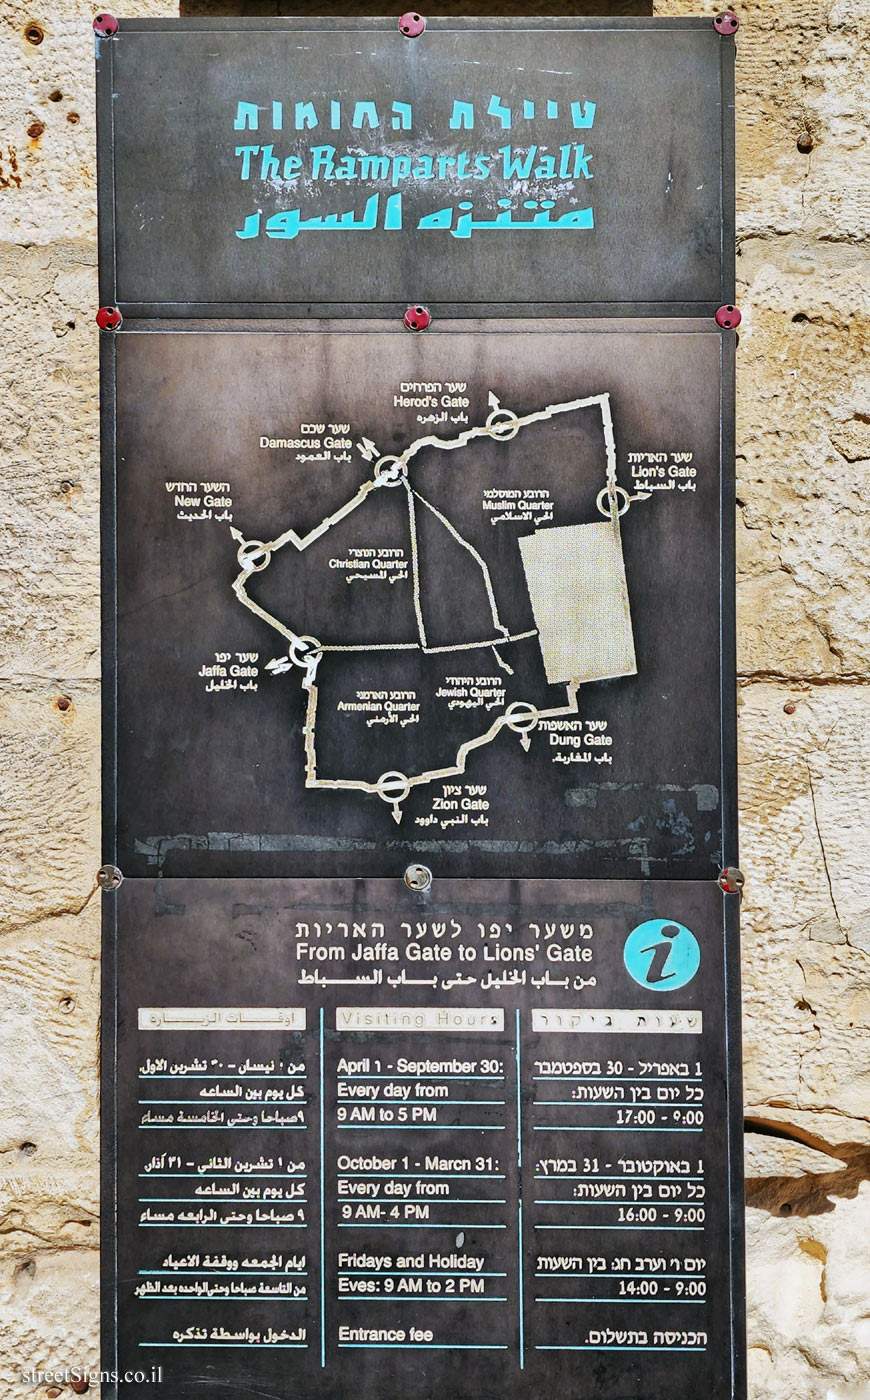 Jerusalem - The Old City - The Ramparts Walk - The map of the walk